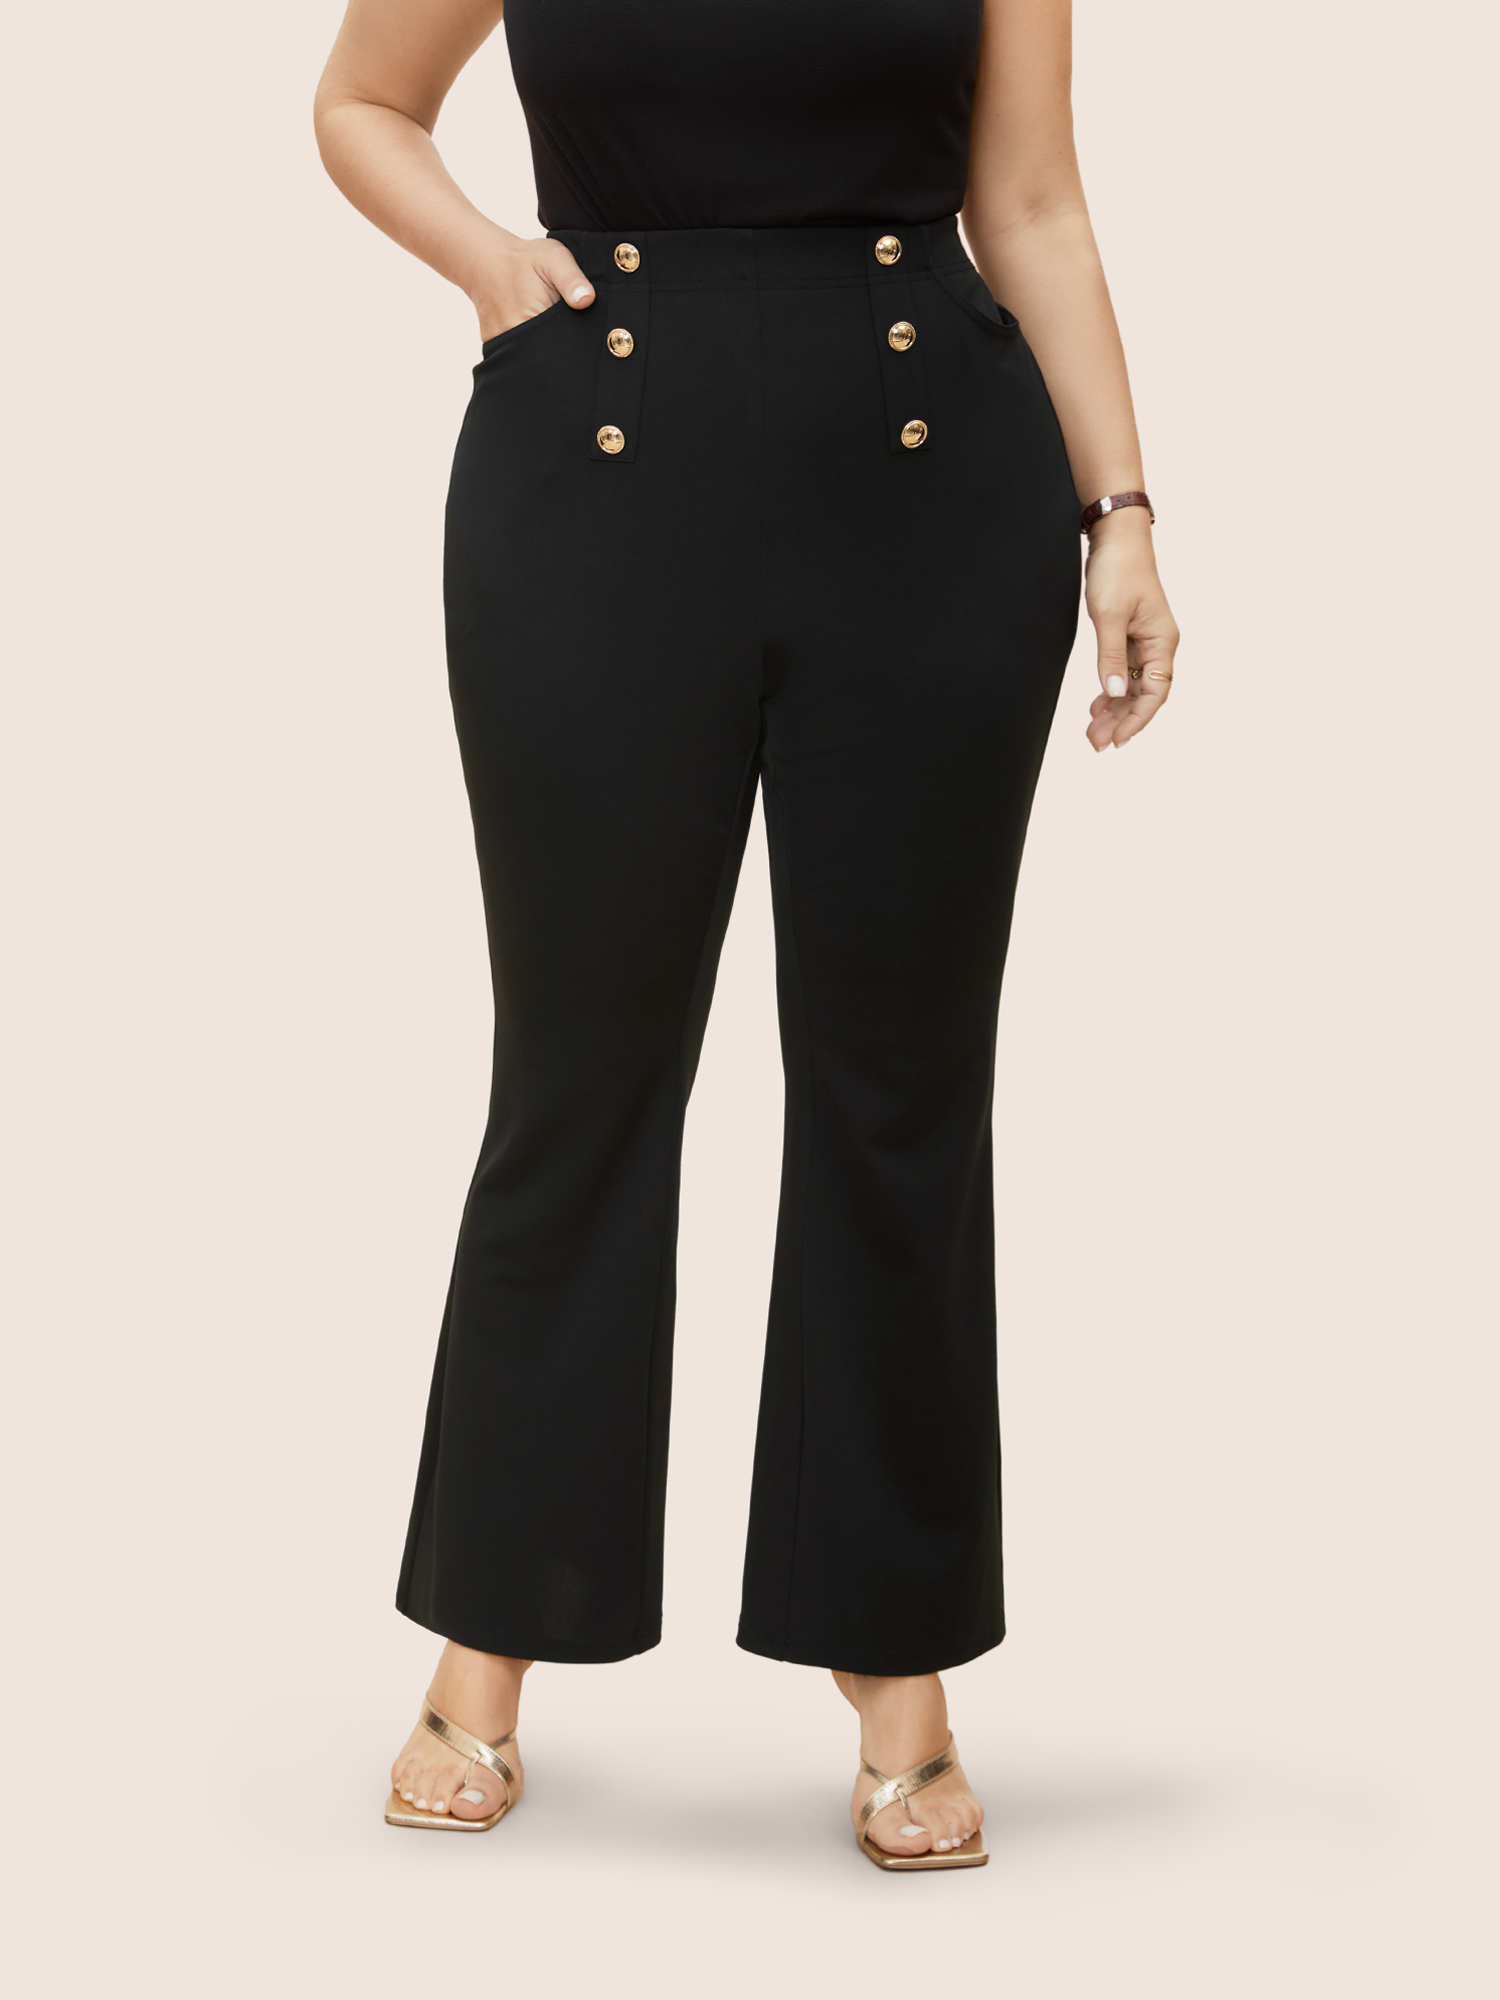 

Plus Size Metal Detail Double Breasted Bootcut Pants Women Black At the Office Bootcut Mid Rise Work Pants BloomChic